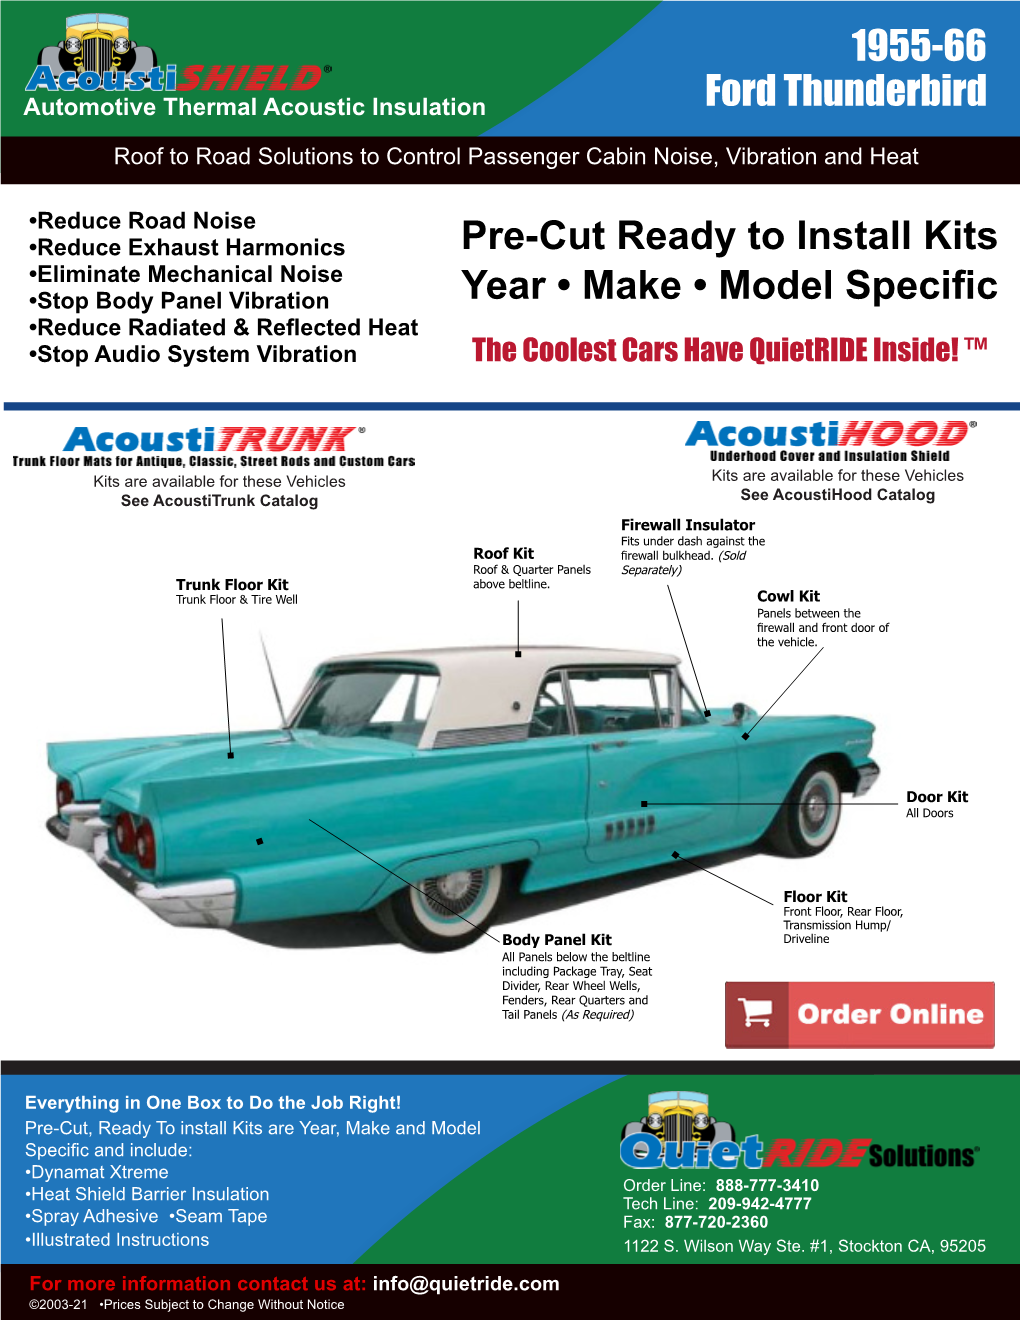 Pre-Cut Ready to Install Kits Year • Make • Model Specific 1955-66 Ford Thunderbird